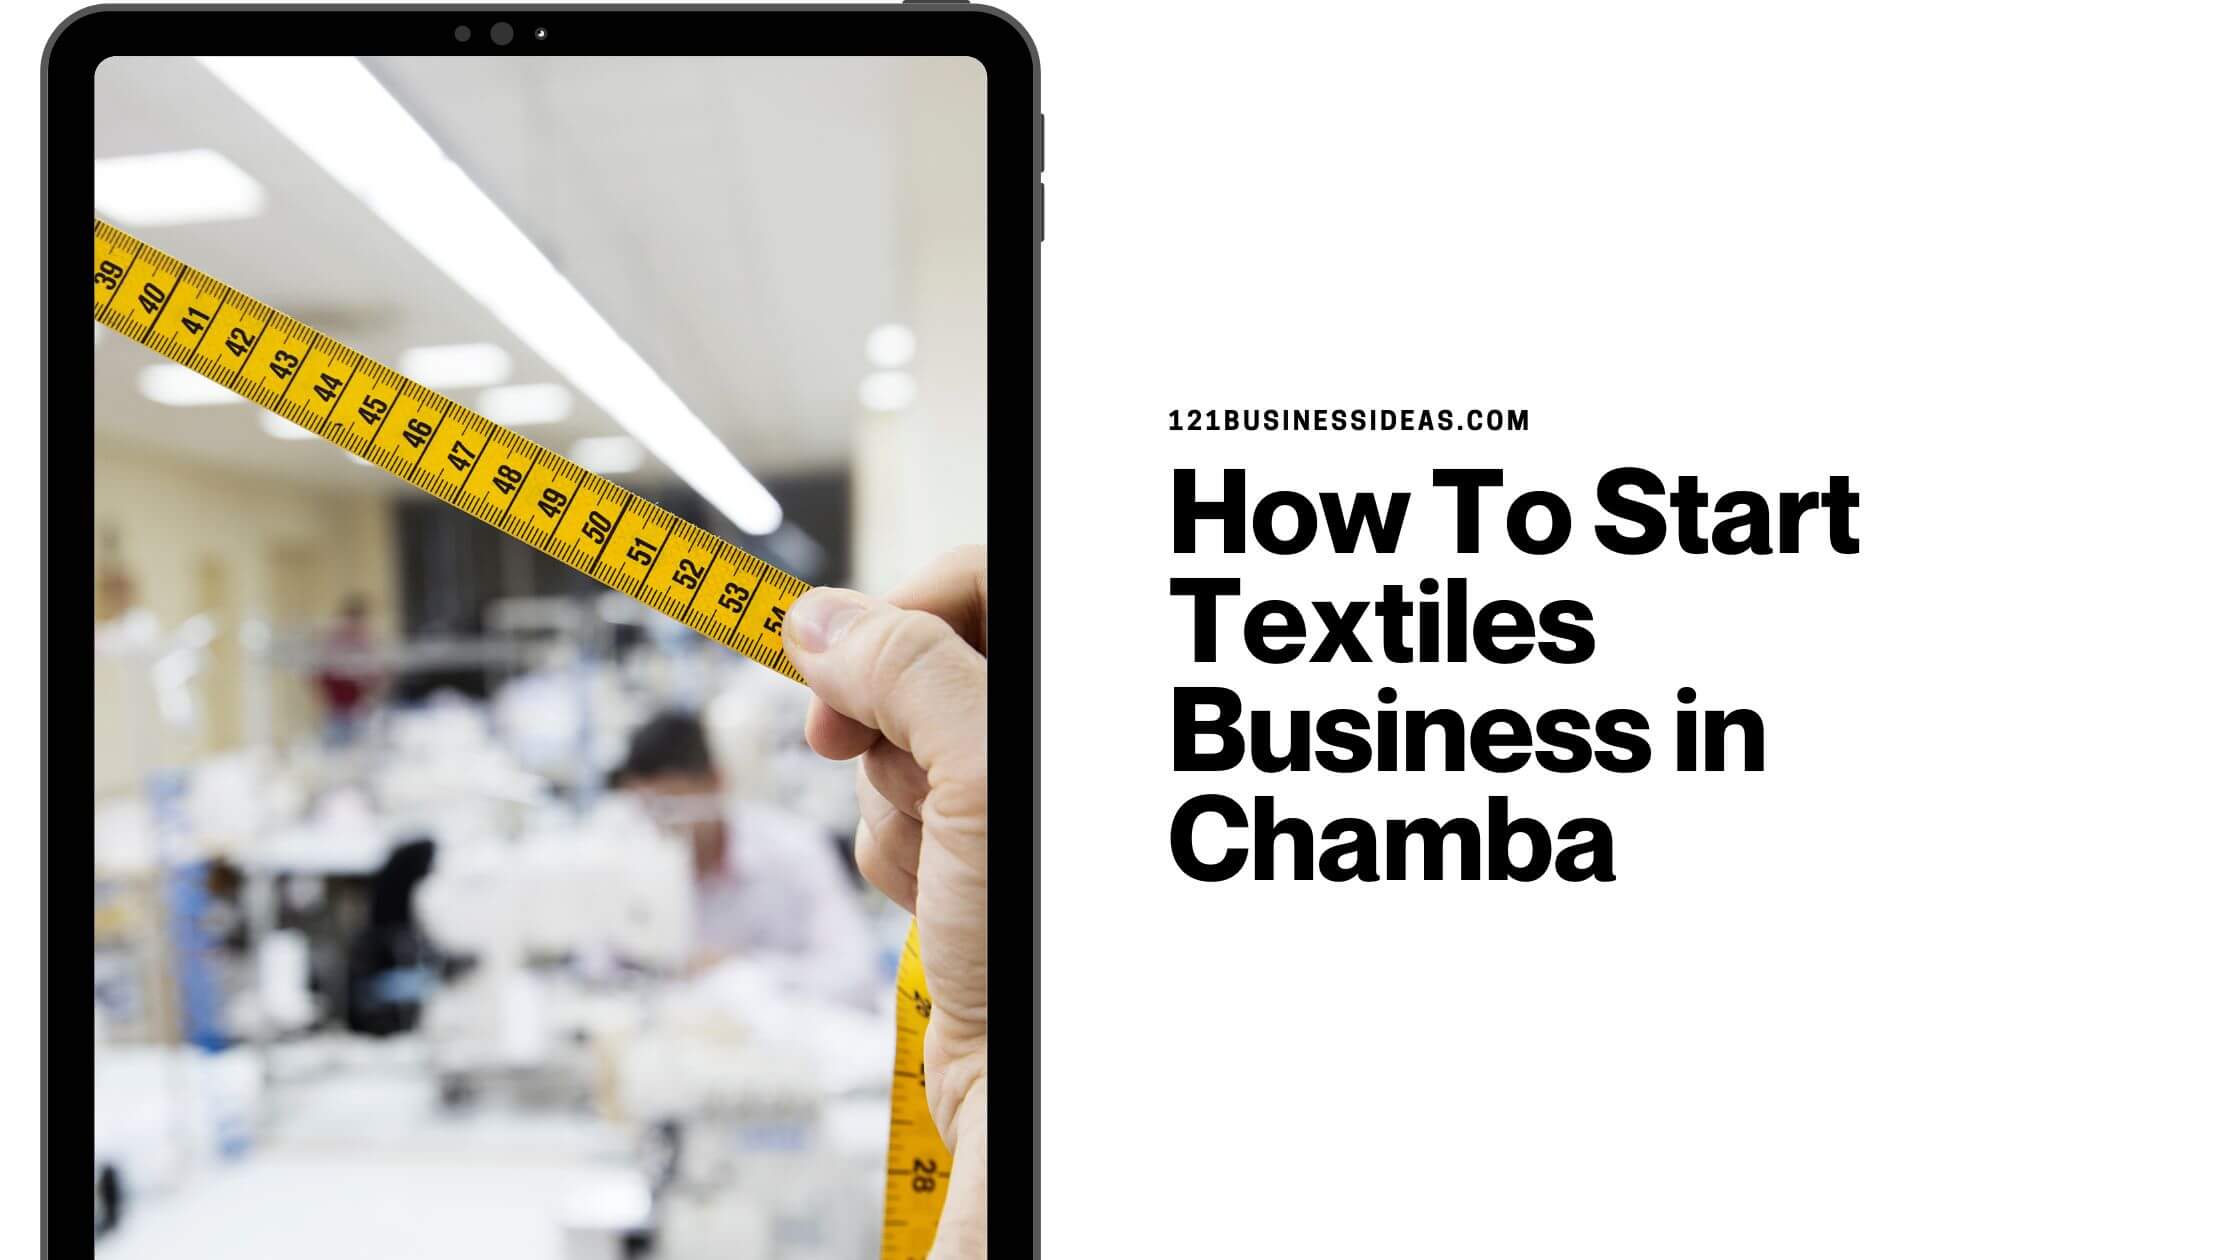 How To Start Textiles Business in Chamba (1)